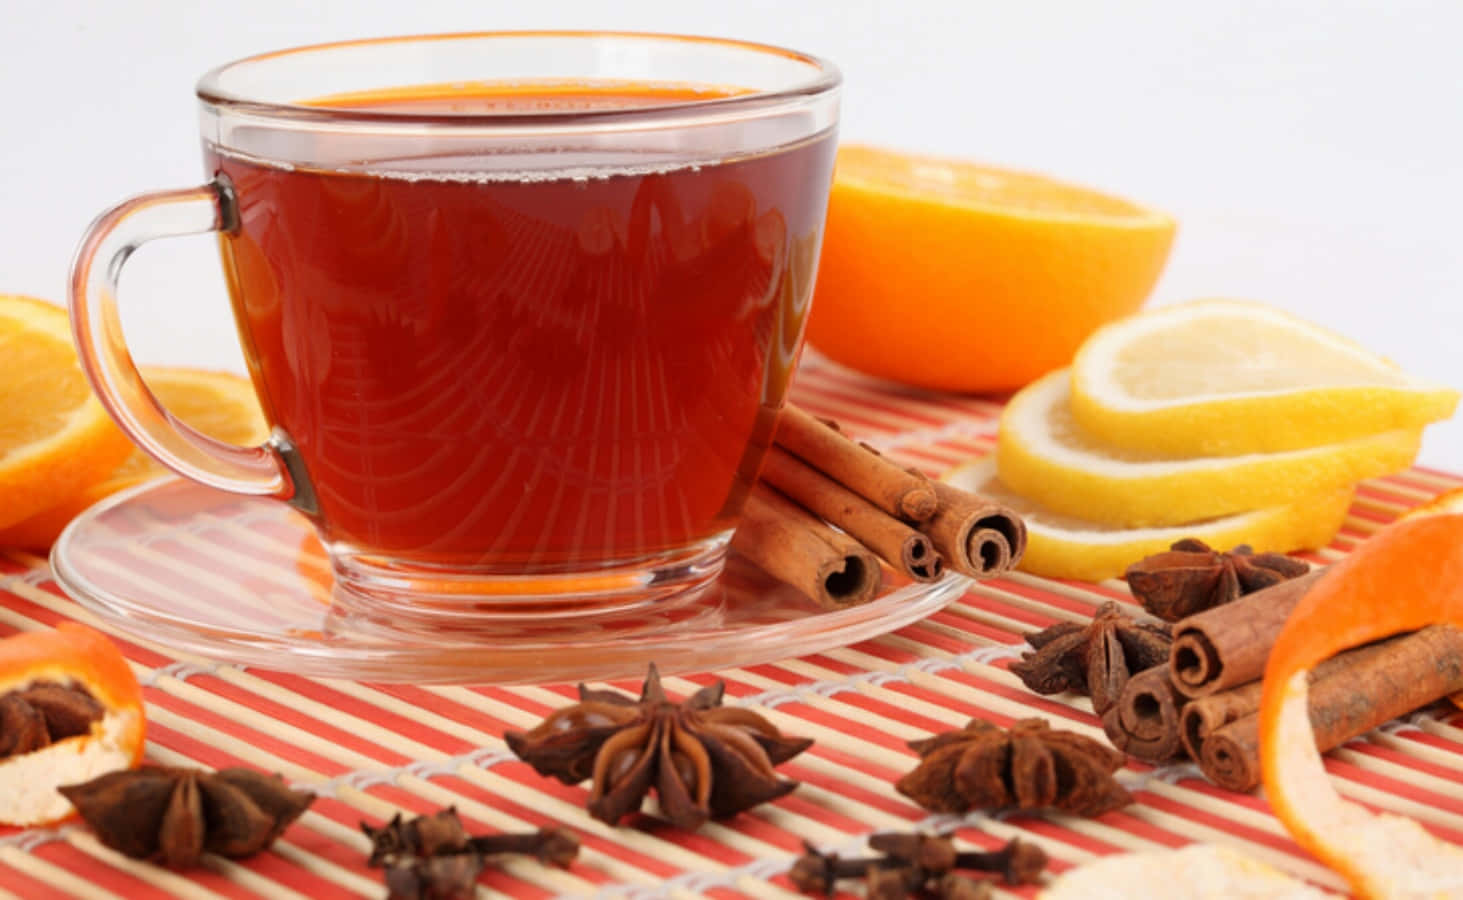 A Cup Of Tea With Cinnamon Sticks And Orange Slices